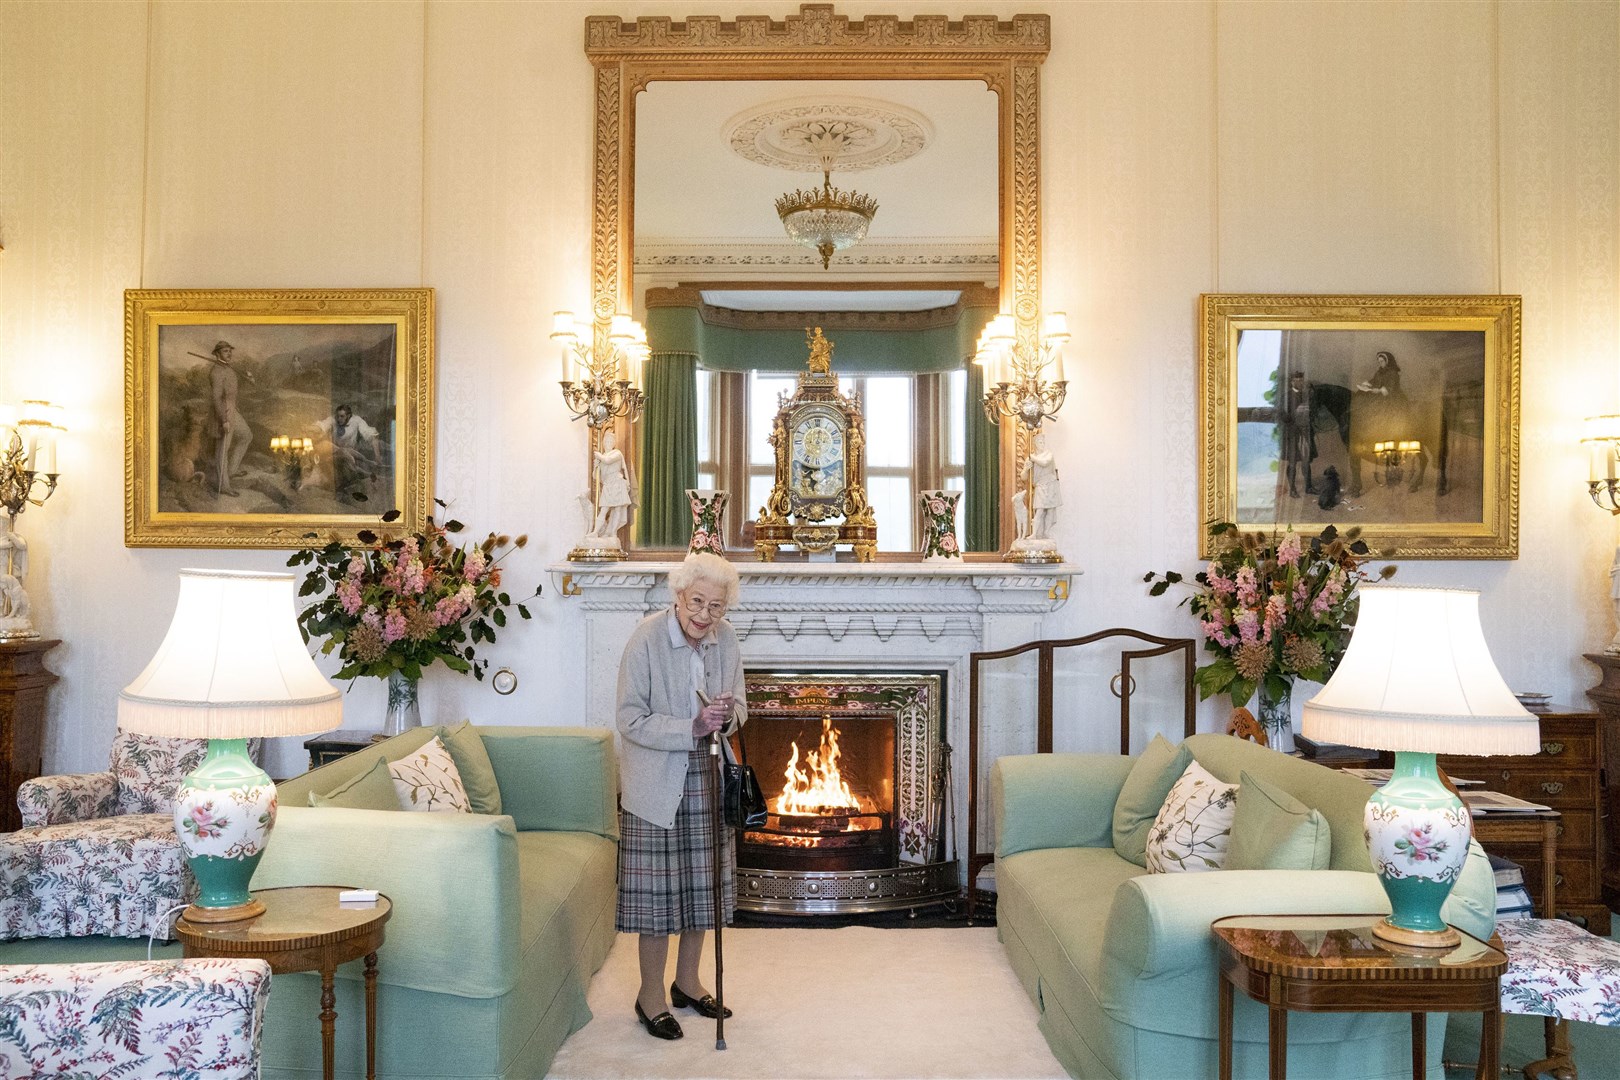 In one of the last official photographs ever taken of the monarch, the Queen waited to greet new Prime Minister Liz Truss at Balmoral in September (Jane Barlow/PA)